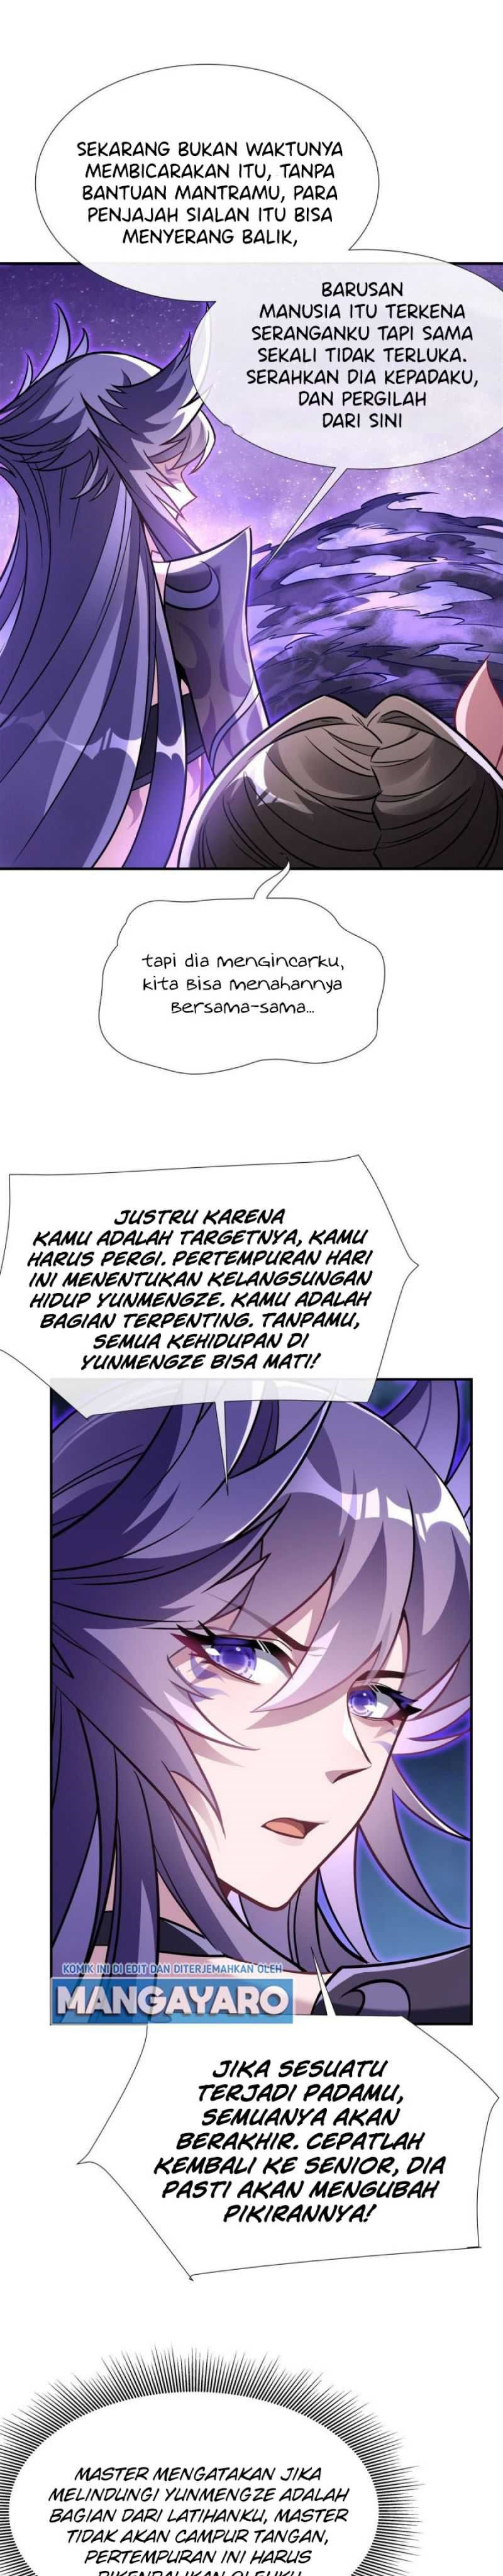 Dilarang COPAS - situs resmi www.mangacanblog.com - Komik my female apprentices are all big shots from the future 111 - chapter 111 112 Indonesia my female apprentices are all big shots from the future 111 - chapter 111 Terbaru 9|Baca Manga Komik Indonesia|Mangacan